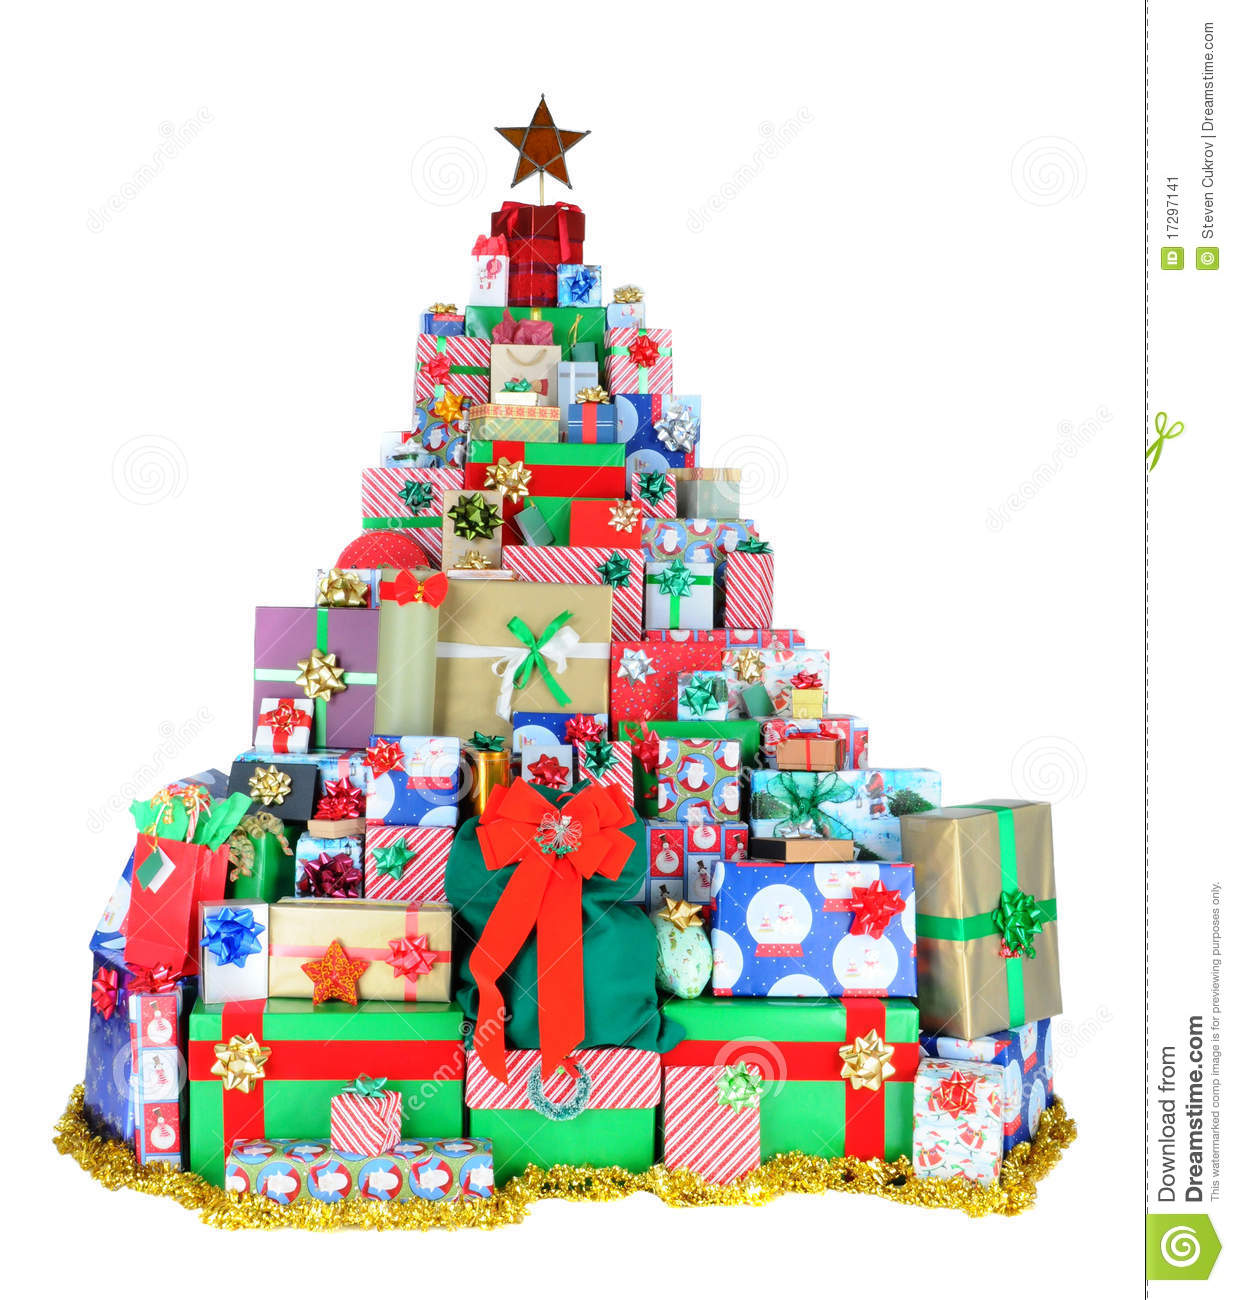 christmas tree from presents - dreomra Dreamstime dreomra dreomself Id 17297141 Download from Dreamstime.com This watermarked comp image is for previewing purpose Steven Cukrov Dreamstime.co only